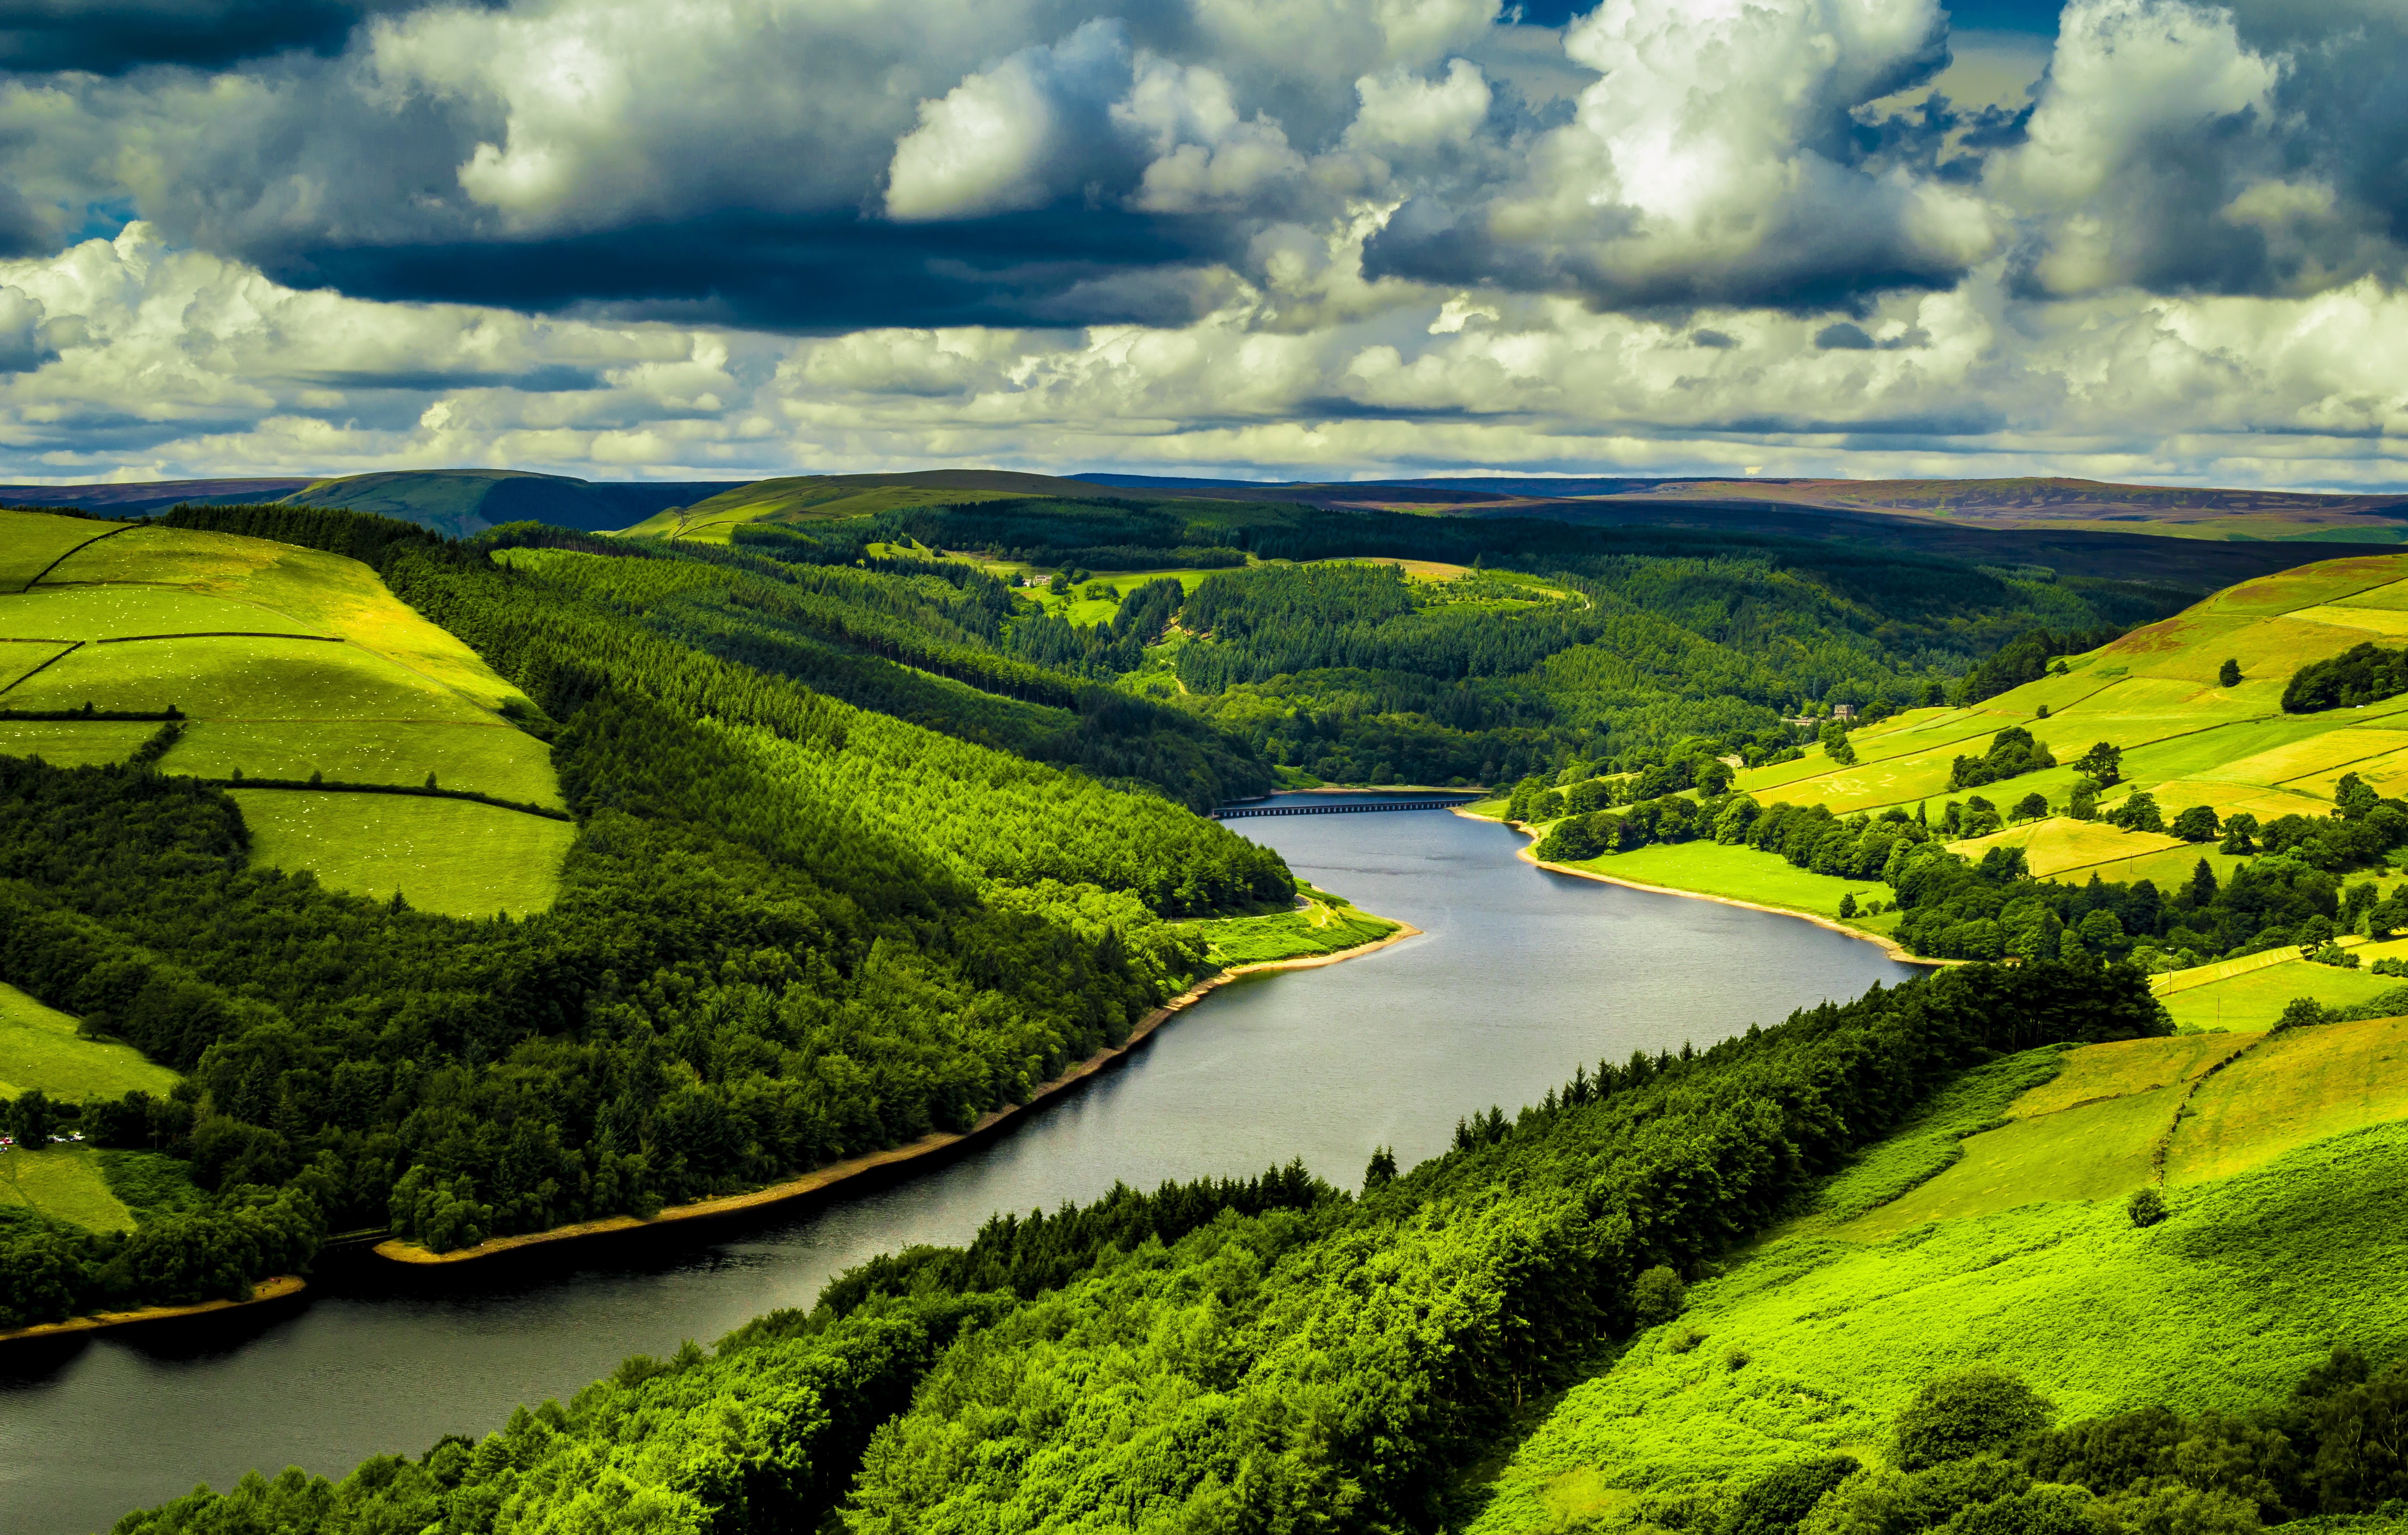 General 5021x3200 river trees forest clouds hills green water landscape England field nature UK